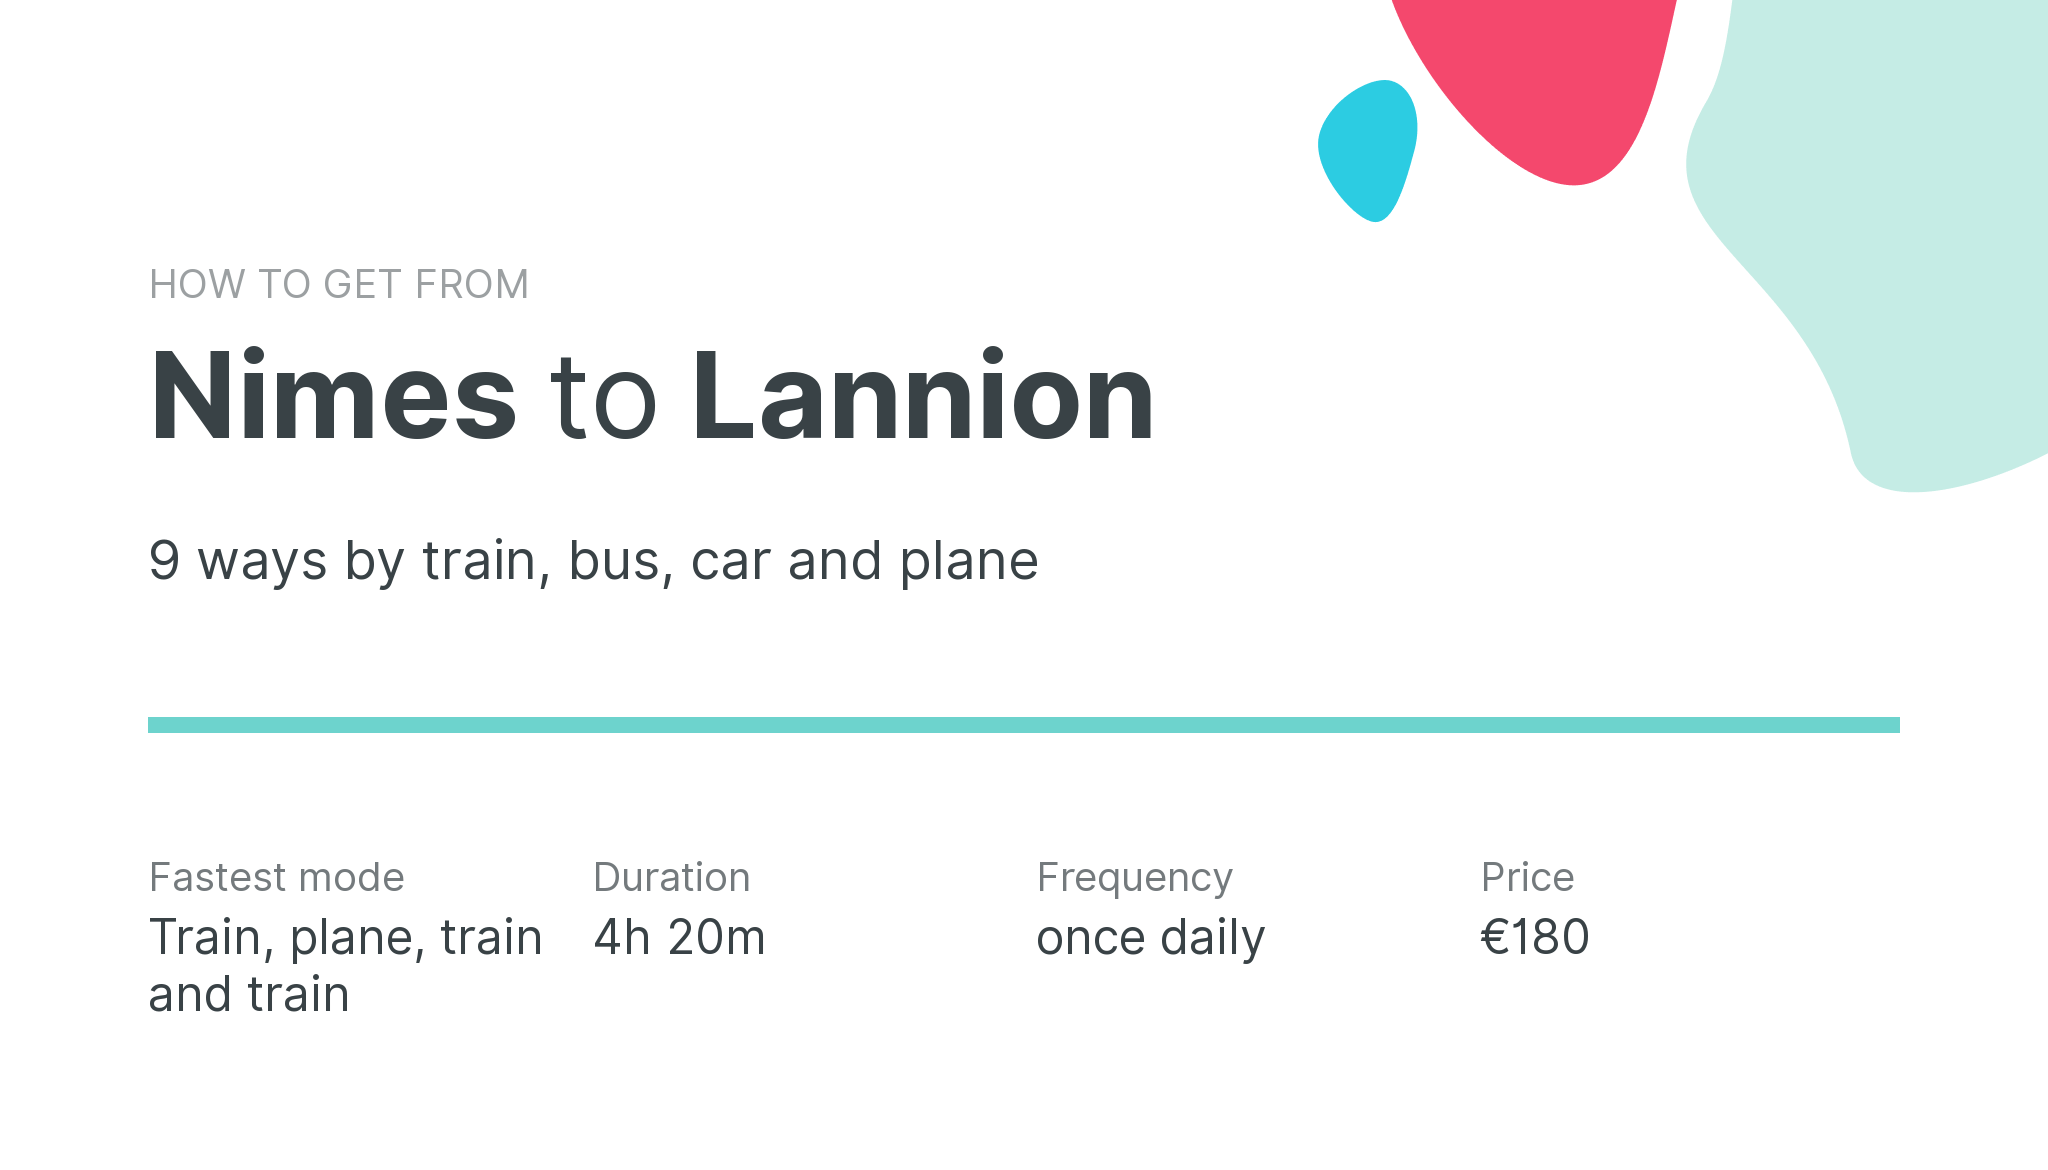 How do I get from Nimes to Lannion